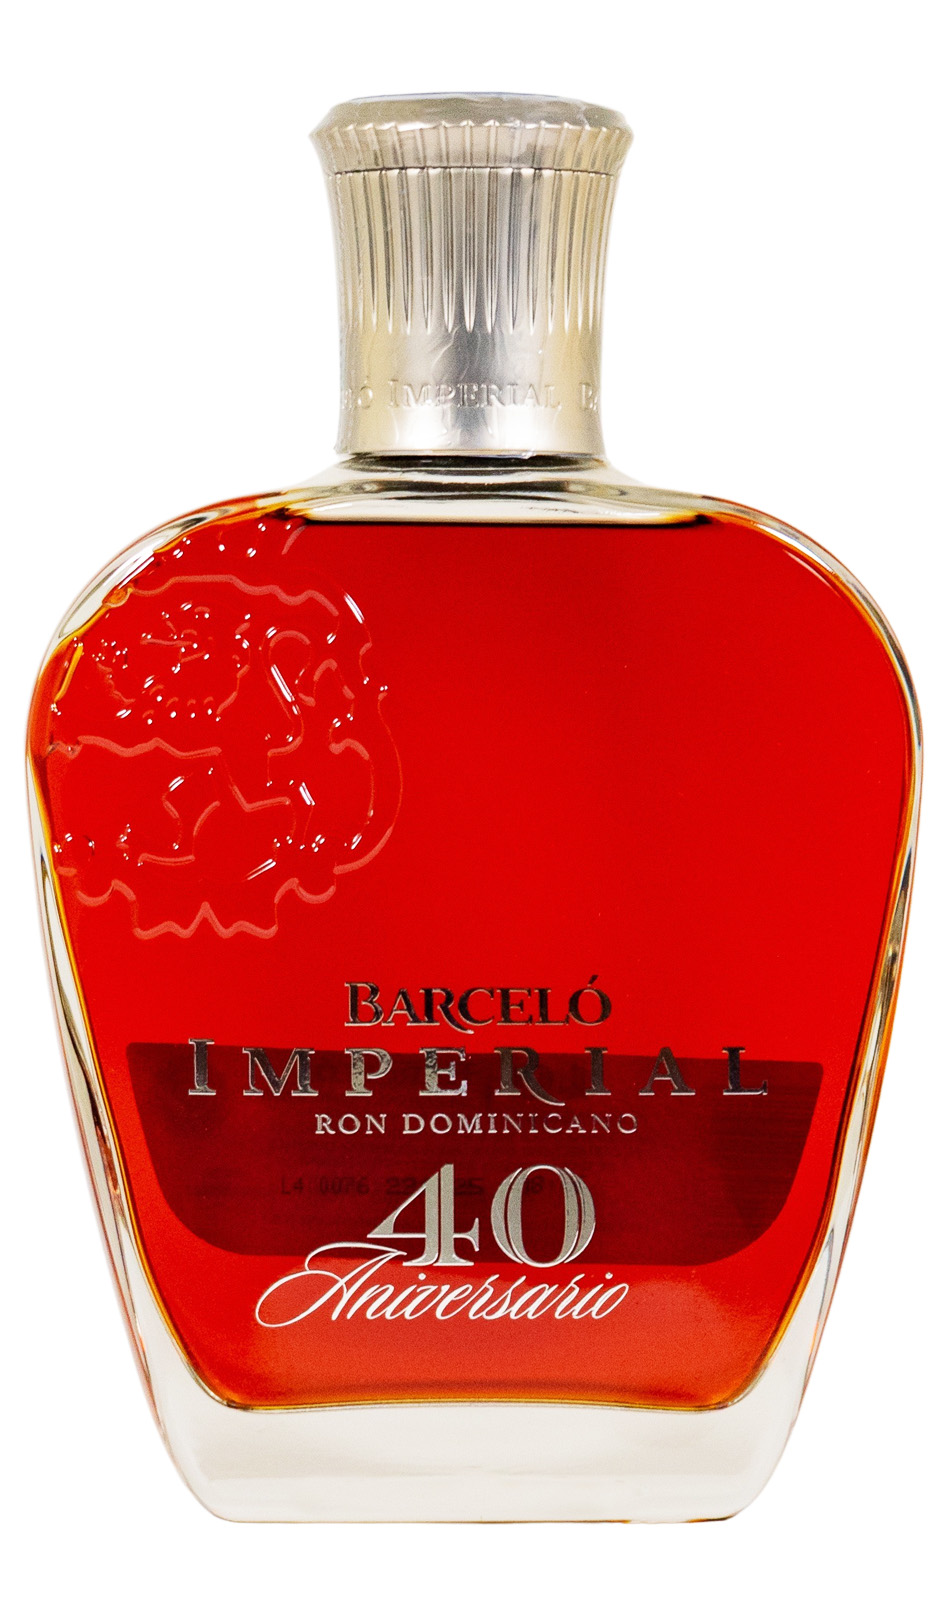 Ron Barcelo Imperial Premium Blend 40 Years - 0,7L 43% vol